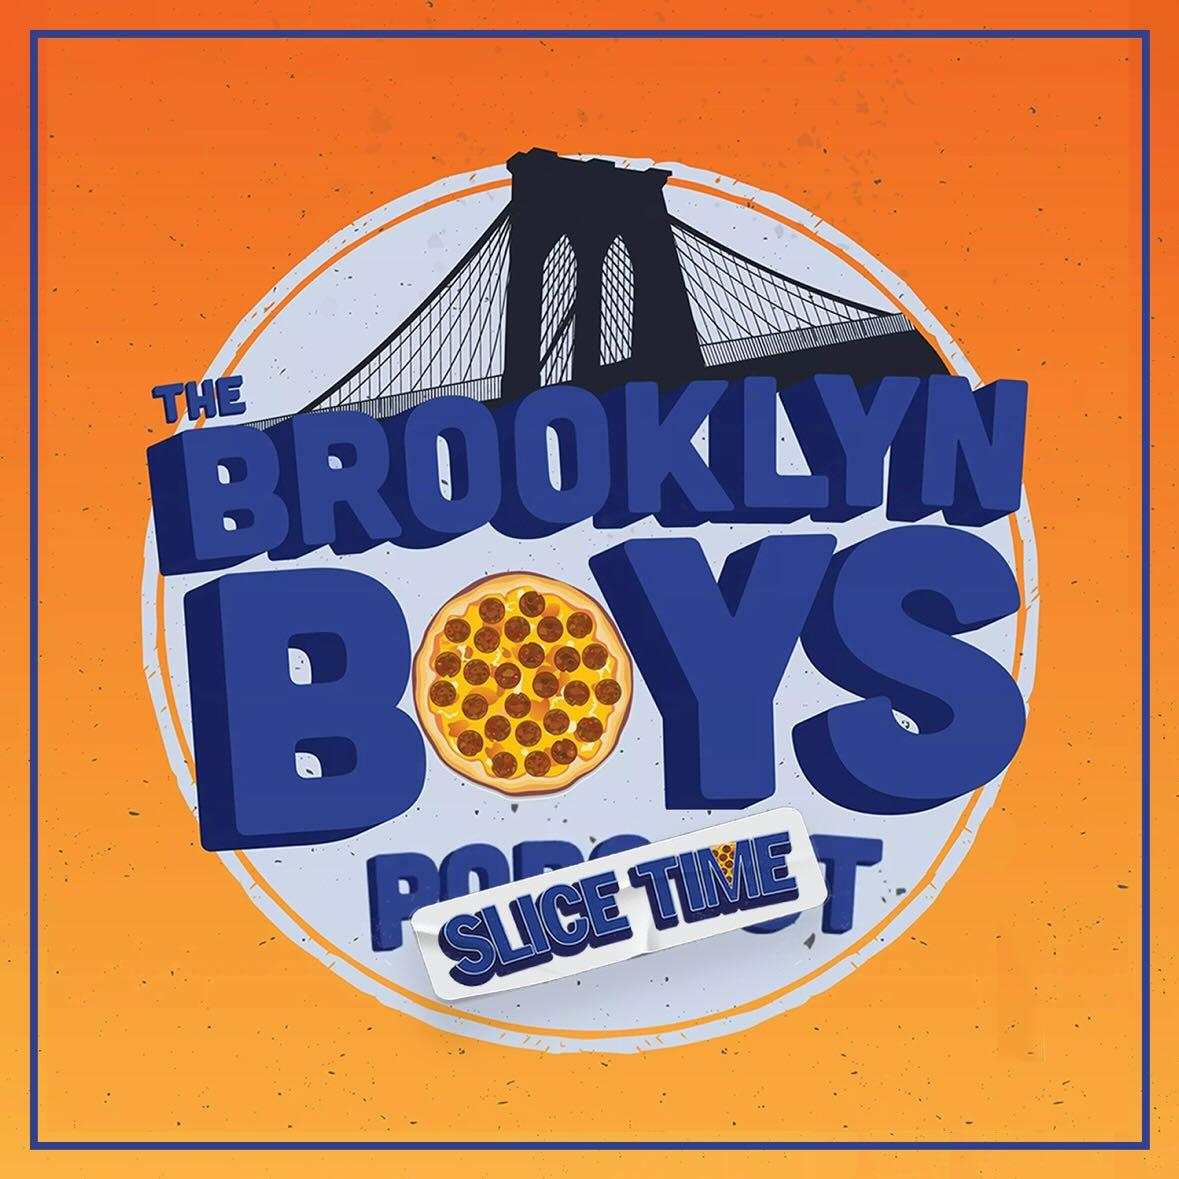 The Brooklyn Boys SLICE TIME for ep #279